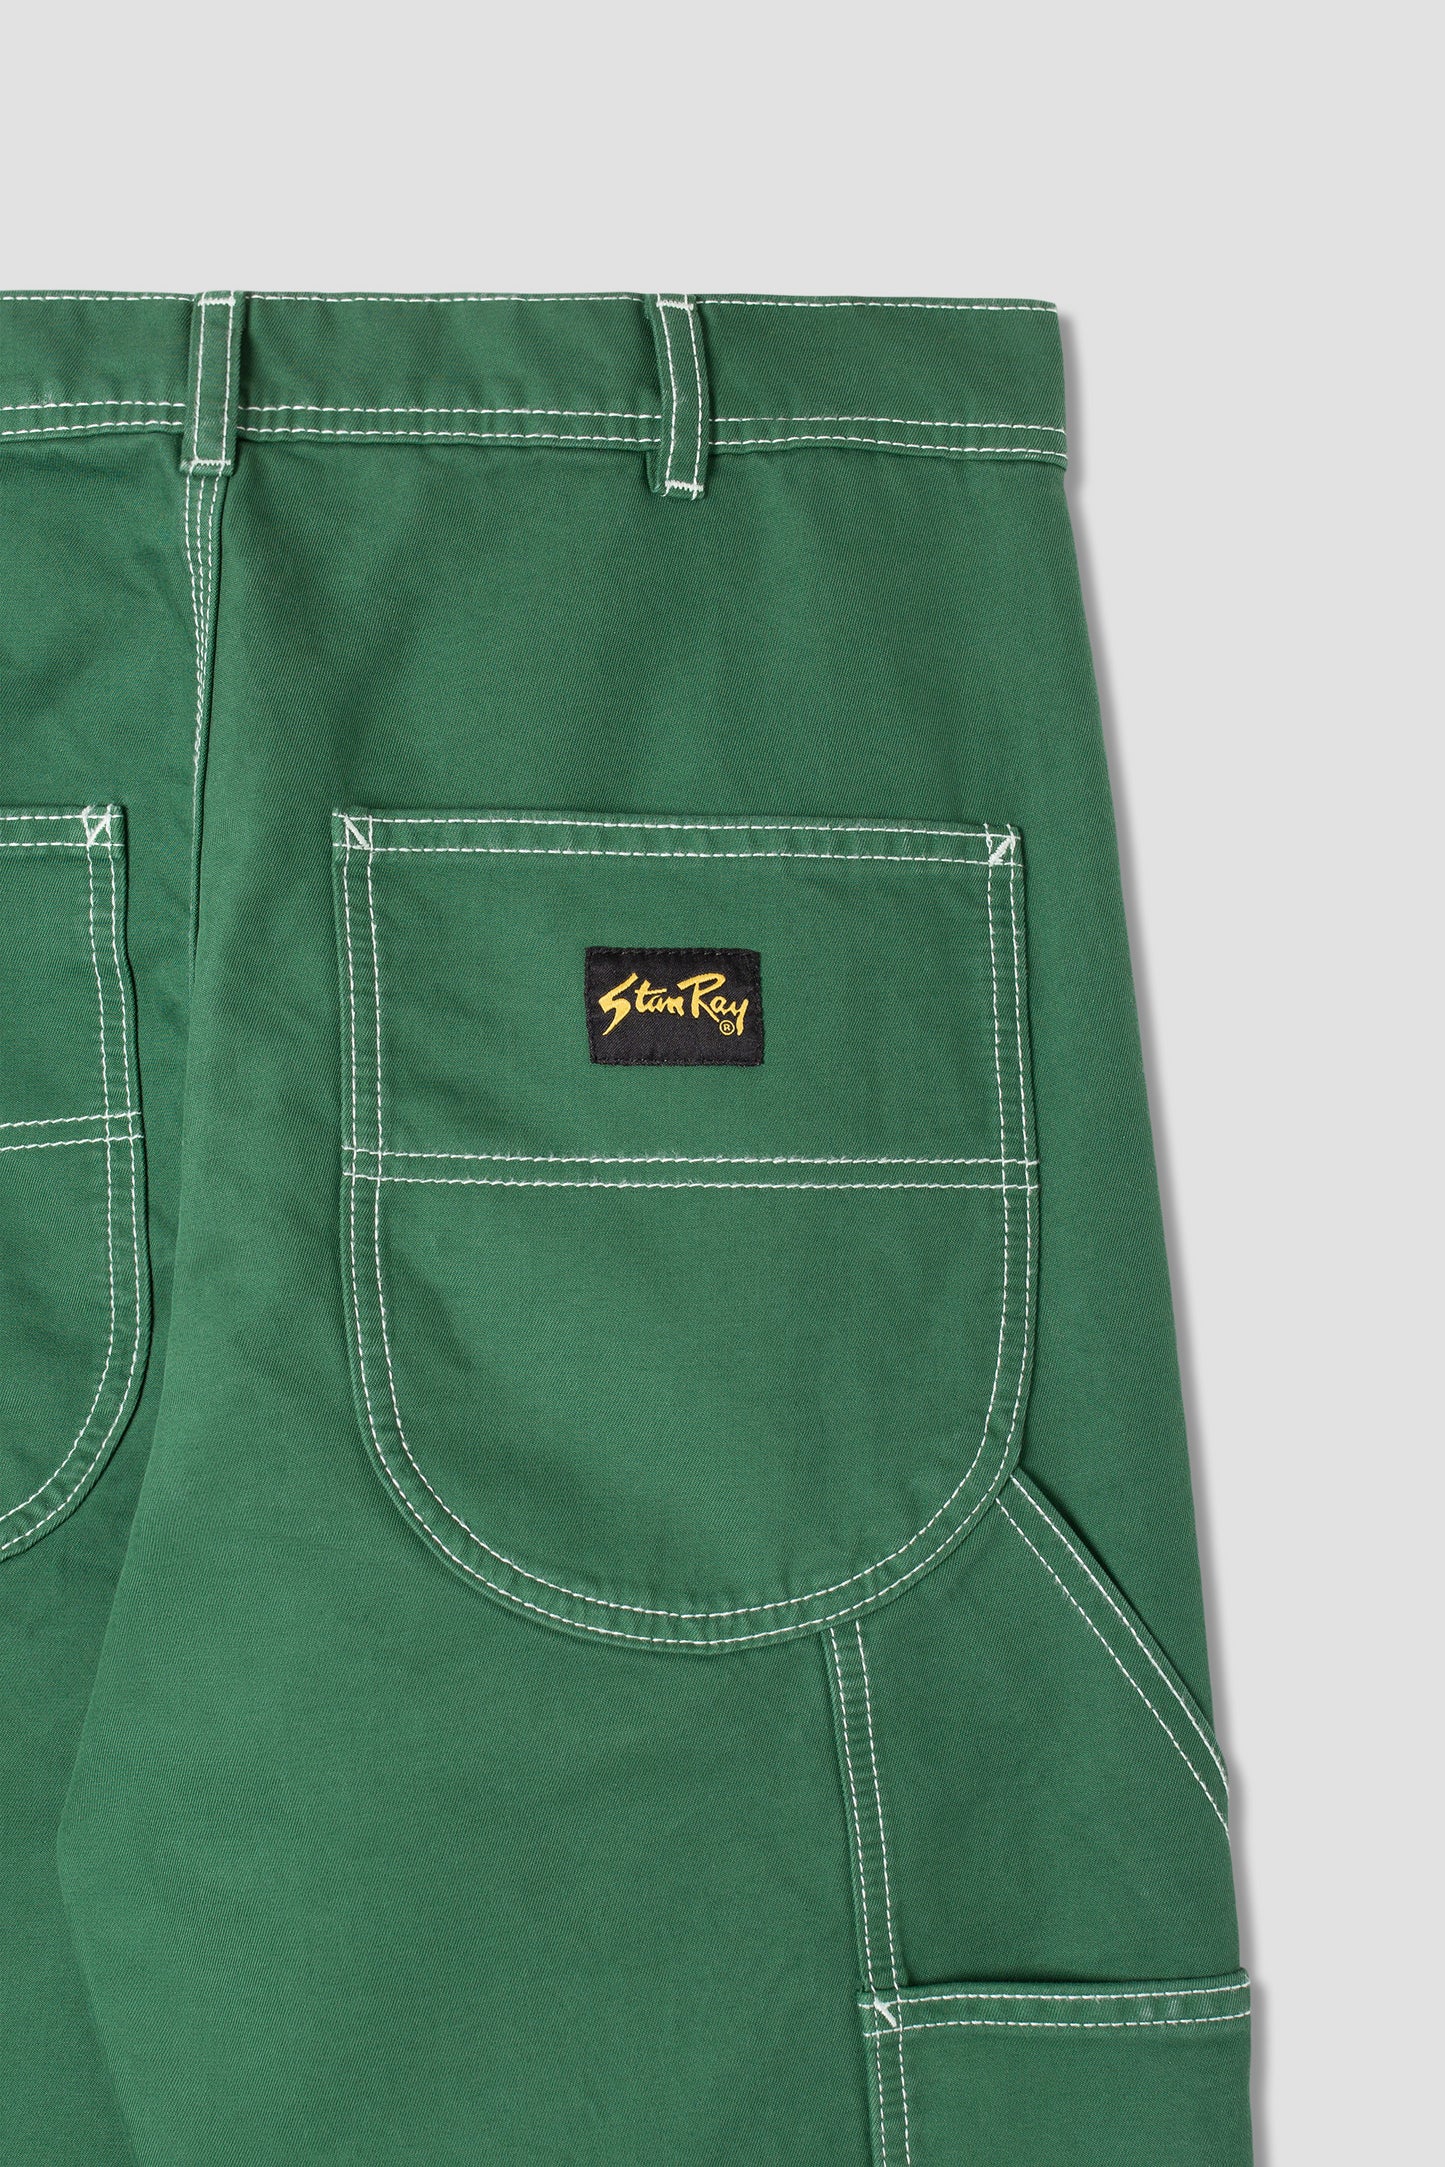 80s Painter Pant (Racing Green Twill)